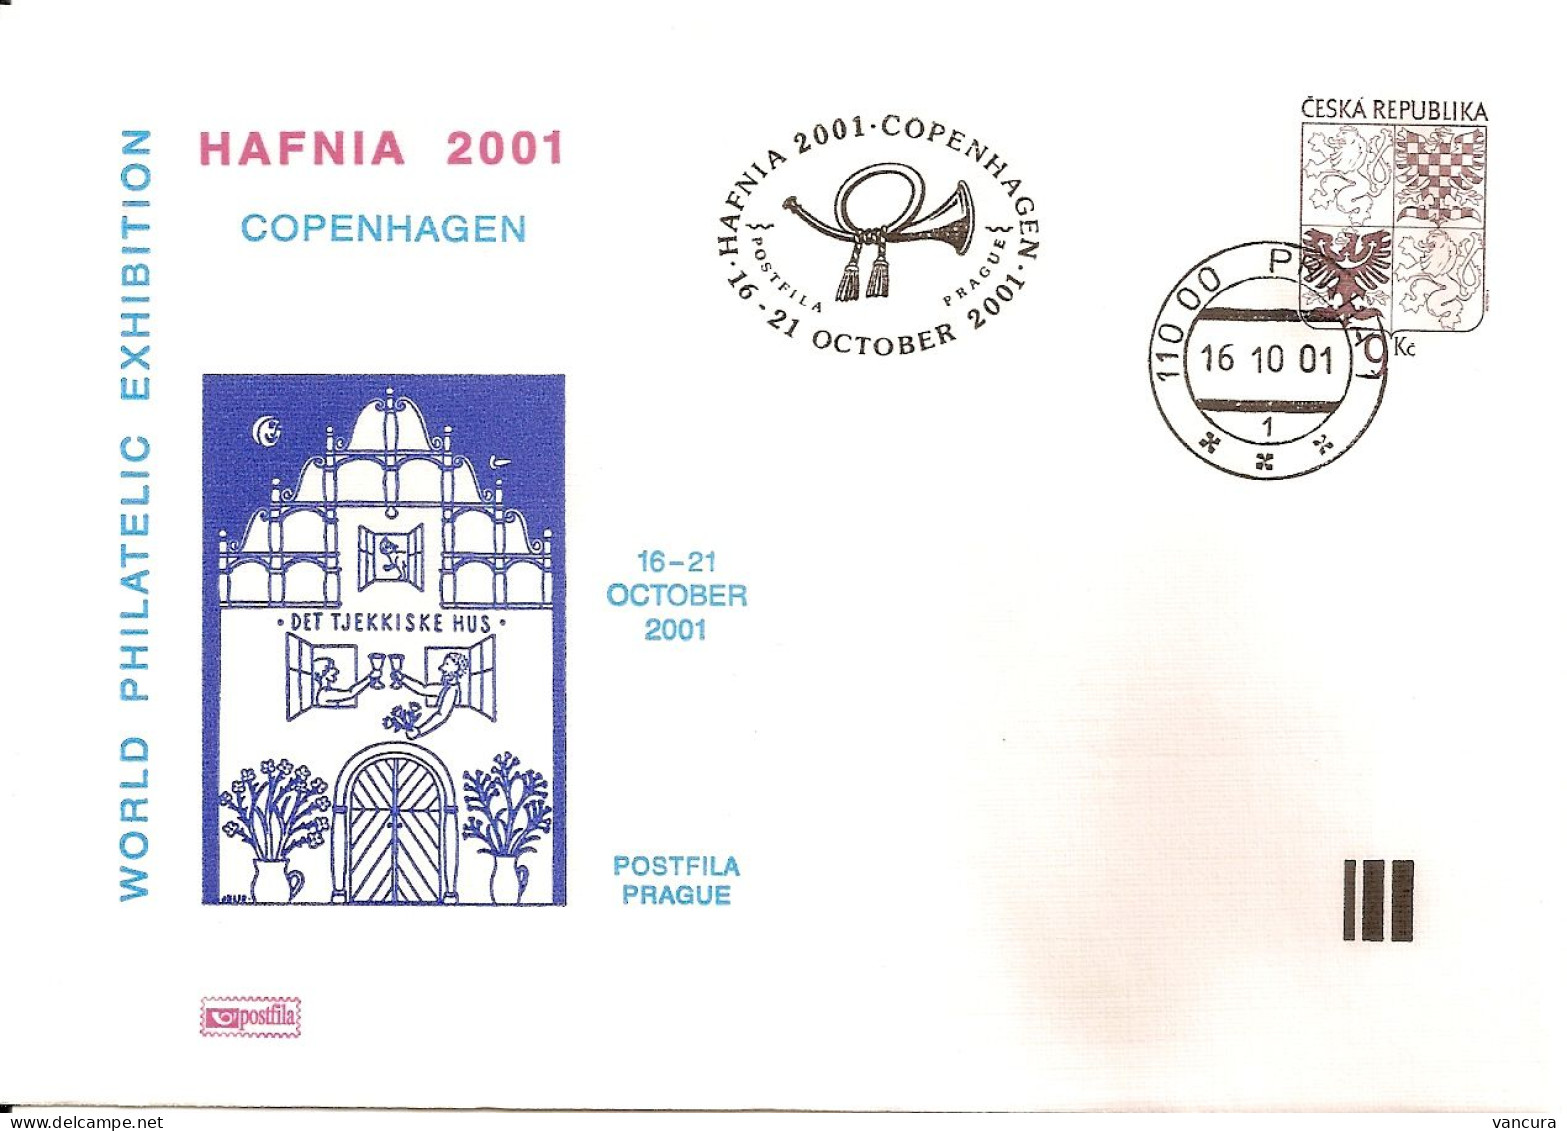 COB A 75 Czech Republic Hafnia Stamp Exhibition 2001 NOTICE POOR SCAN, BUT THE COVER IS FINE! - Covers